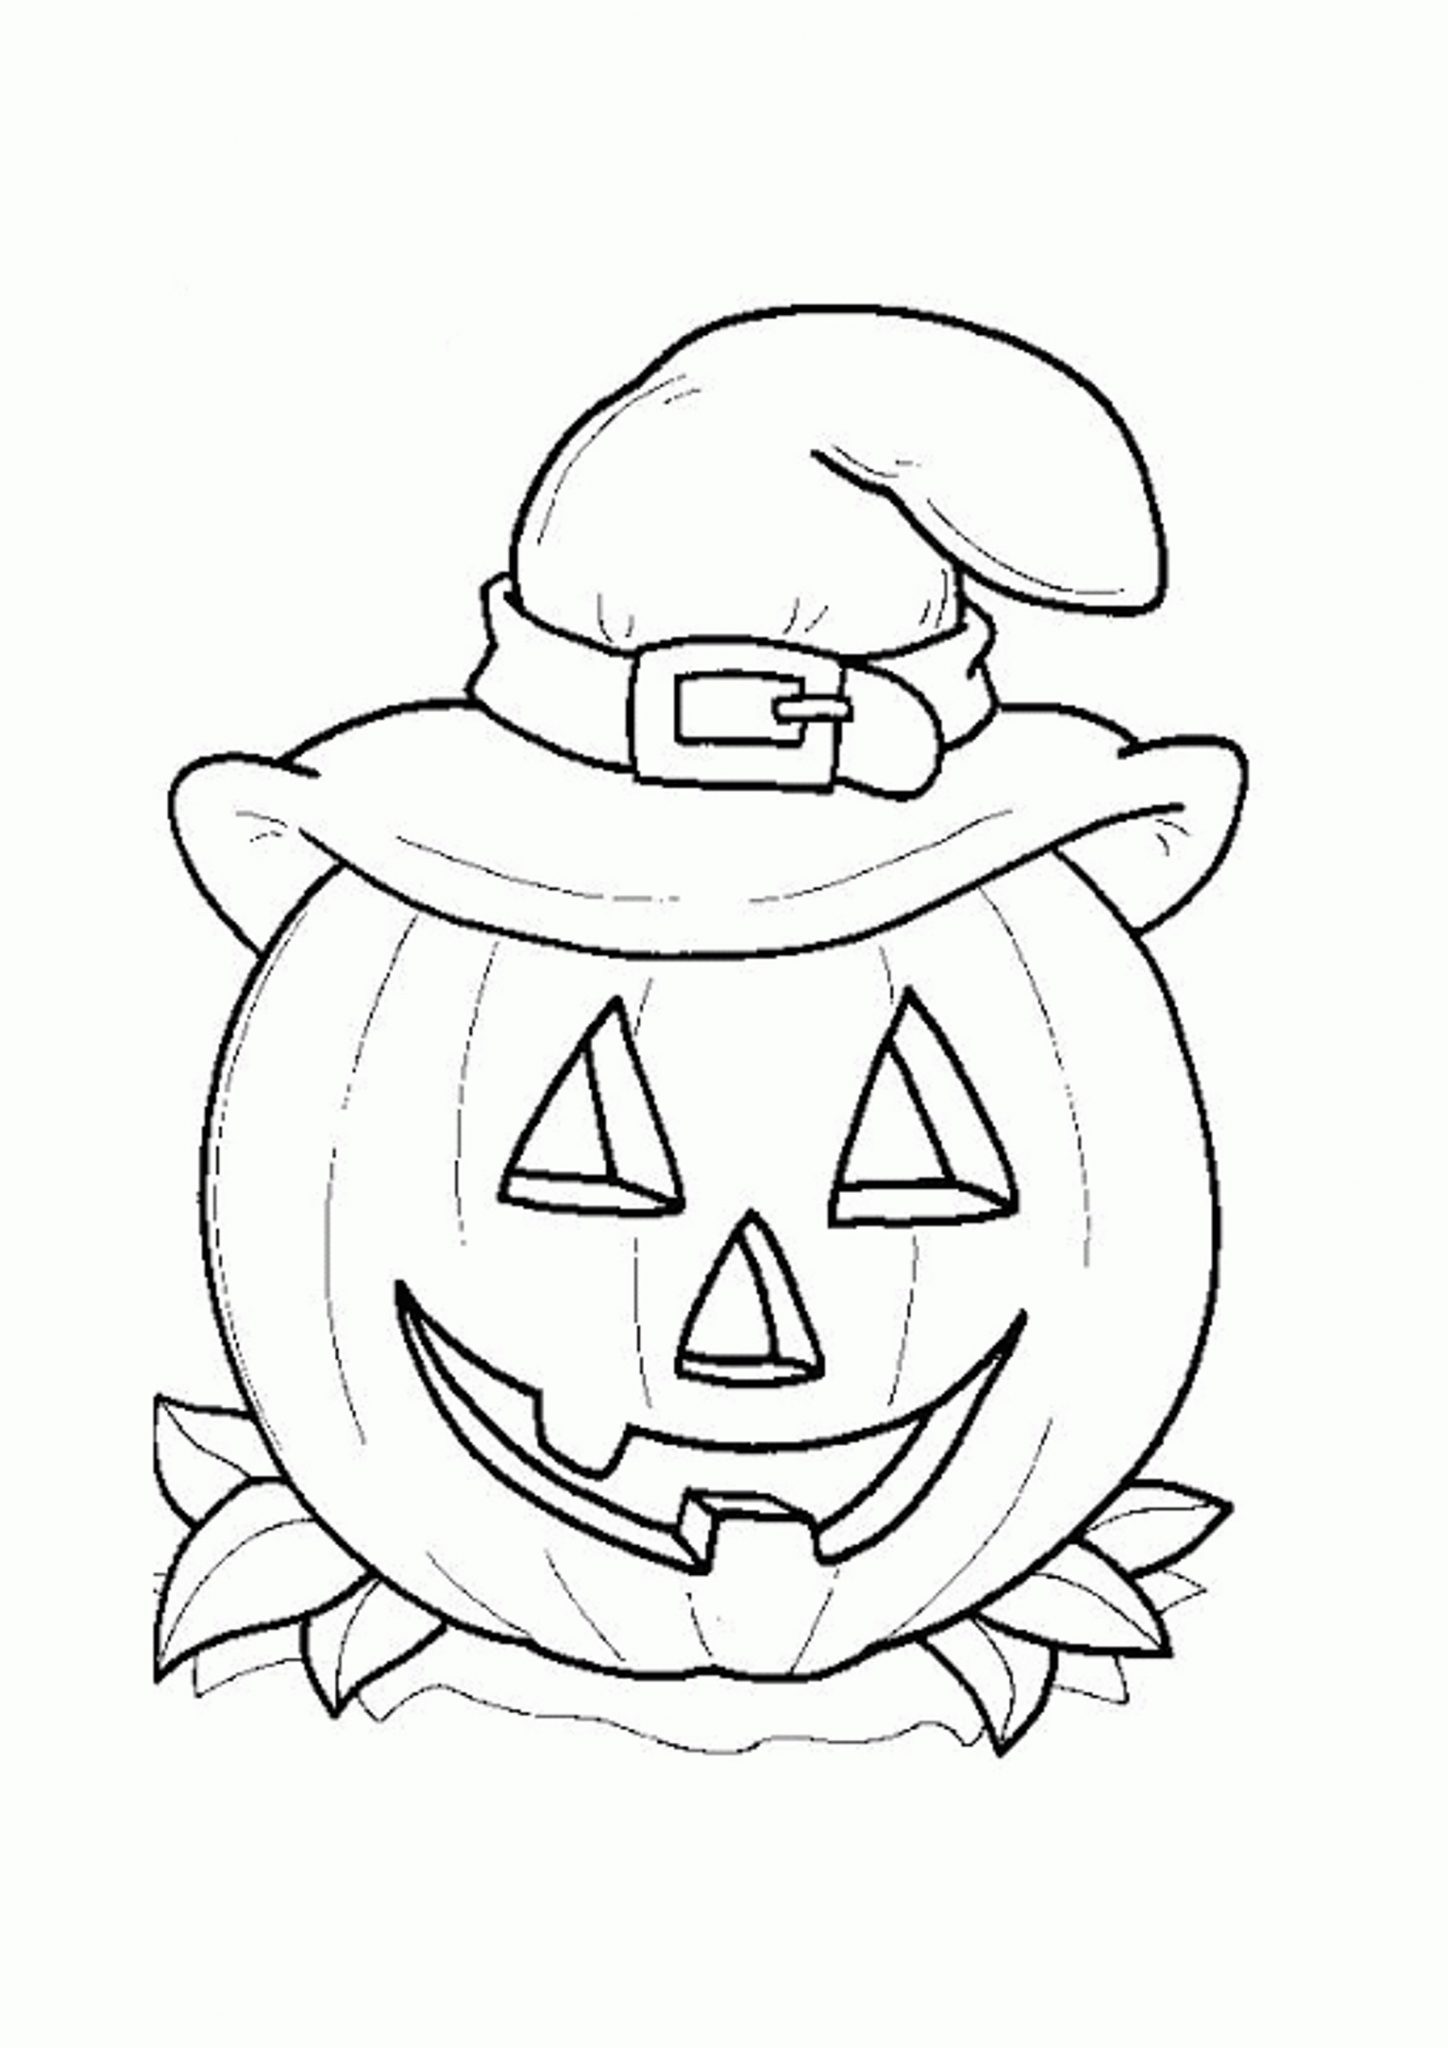 free halloween pumpkin coloring pages